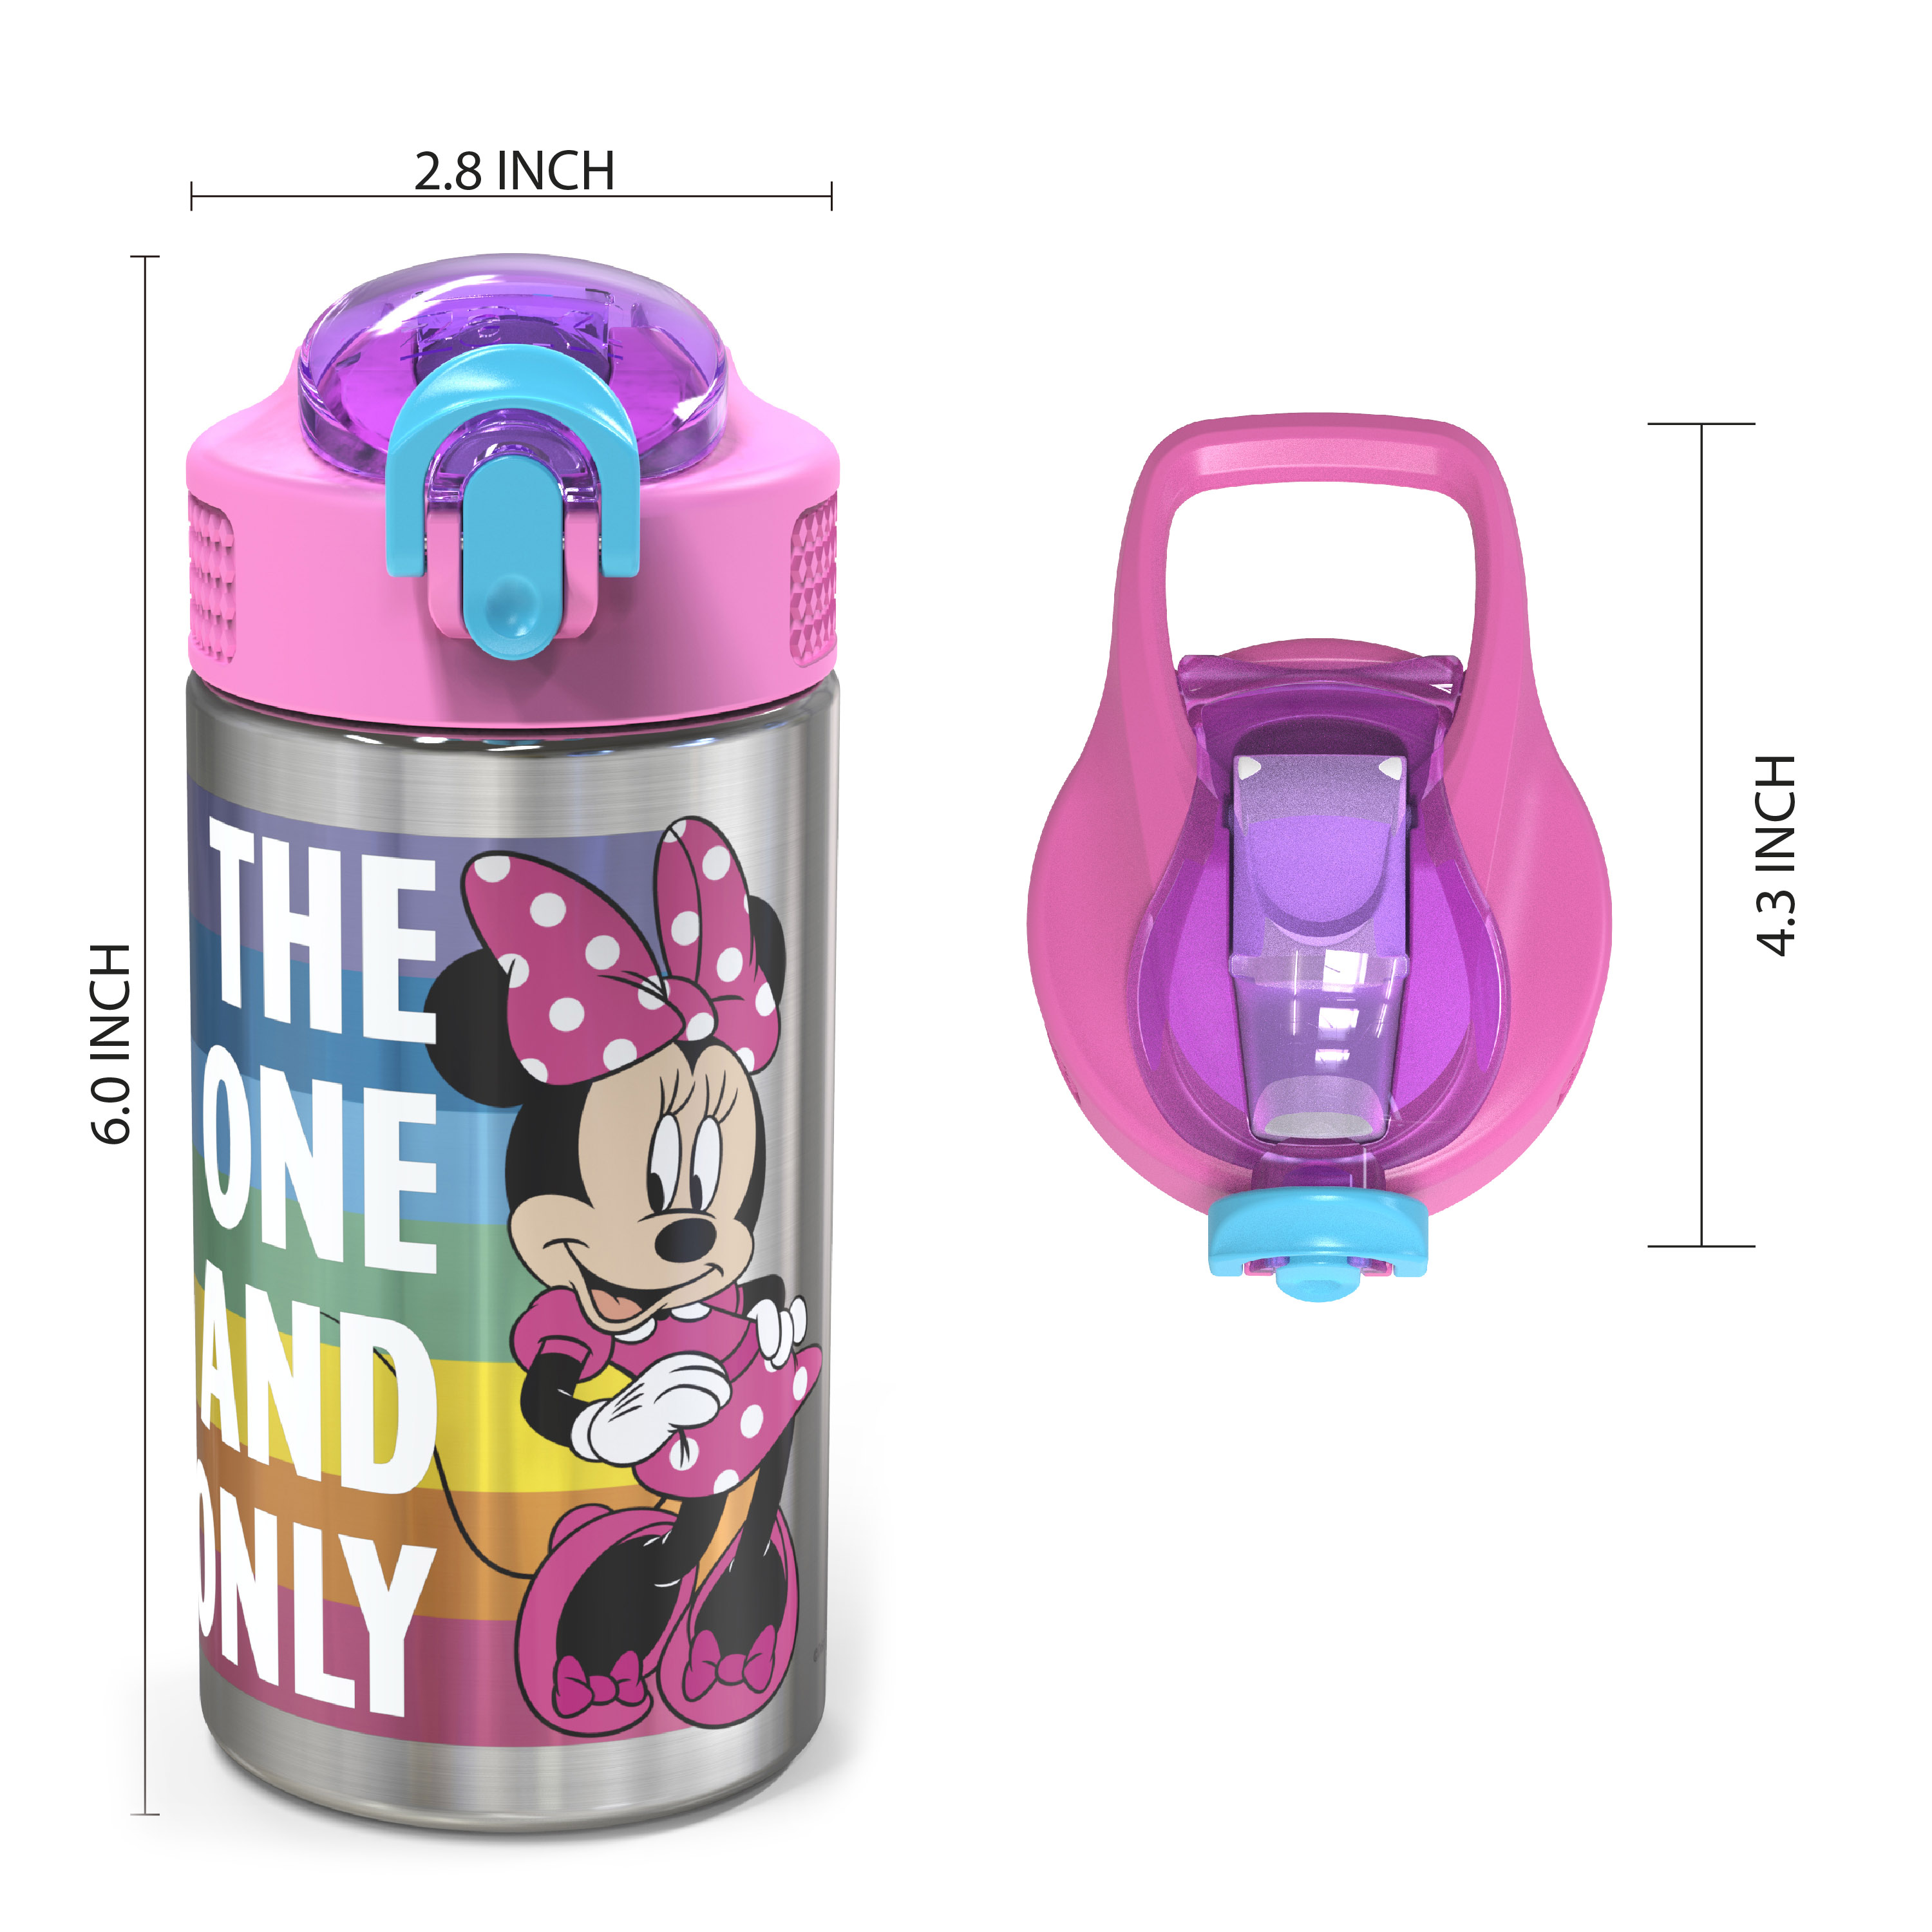 Disney 15.5 ounce Stainless Steel Water Bottle with Built-in Carrying Loop, Minnie Mouse slideshow image 5